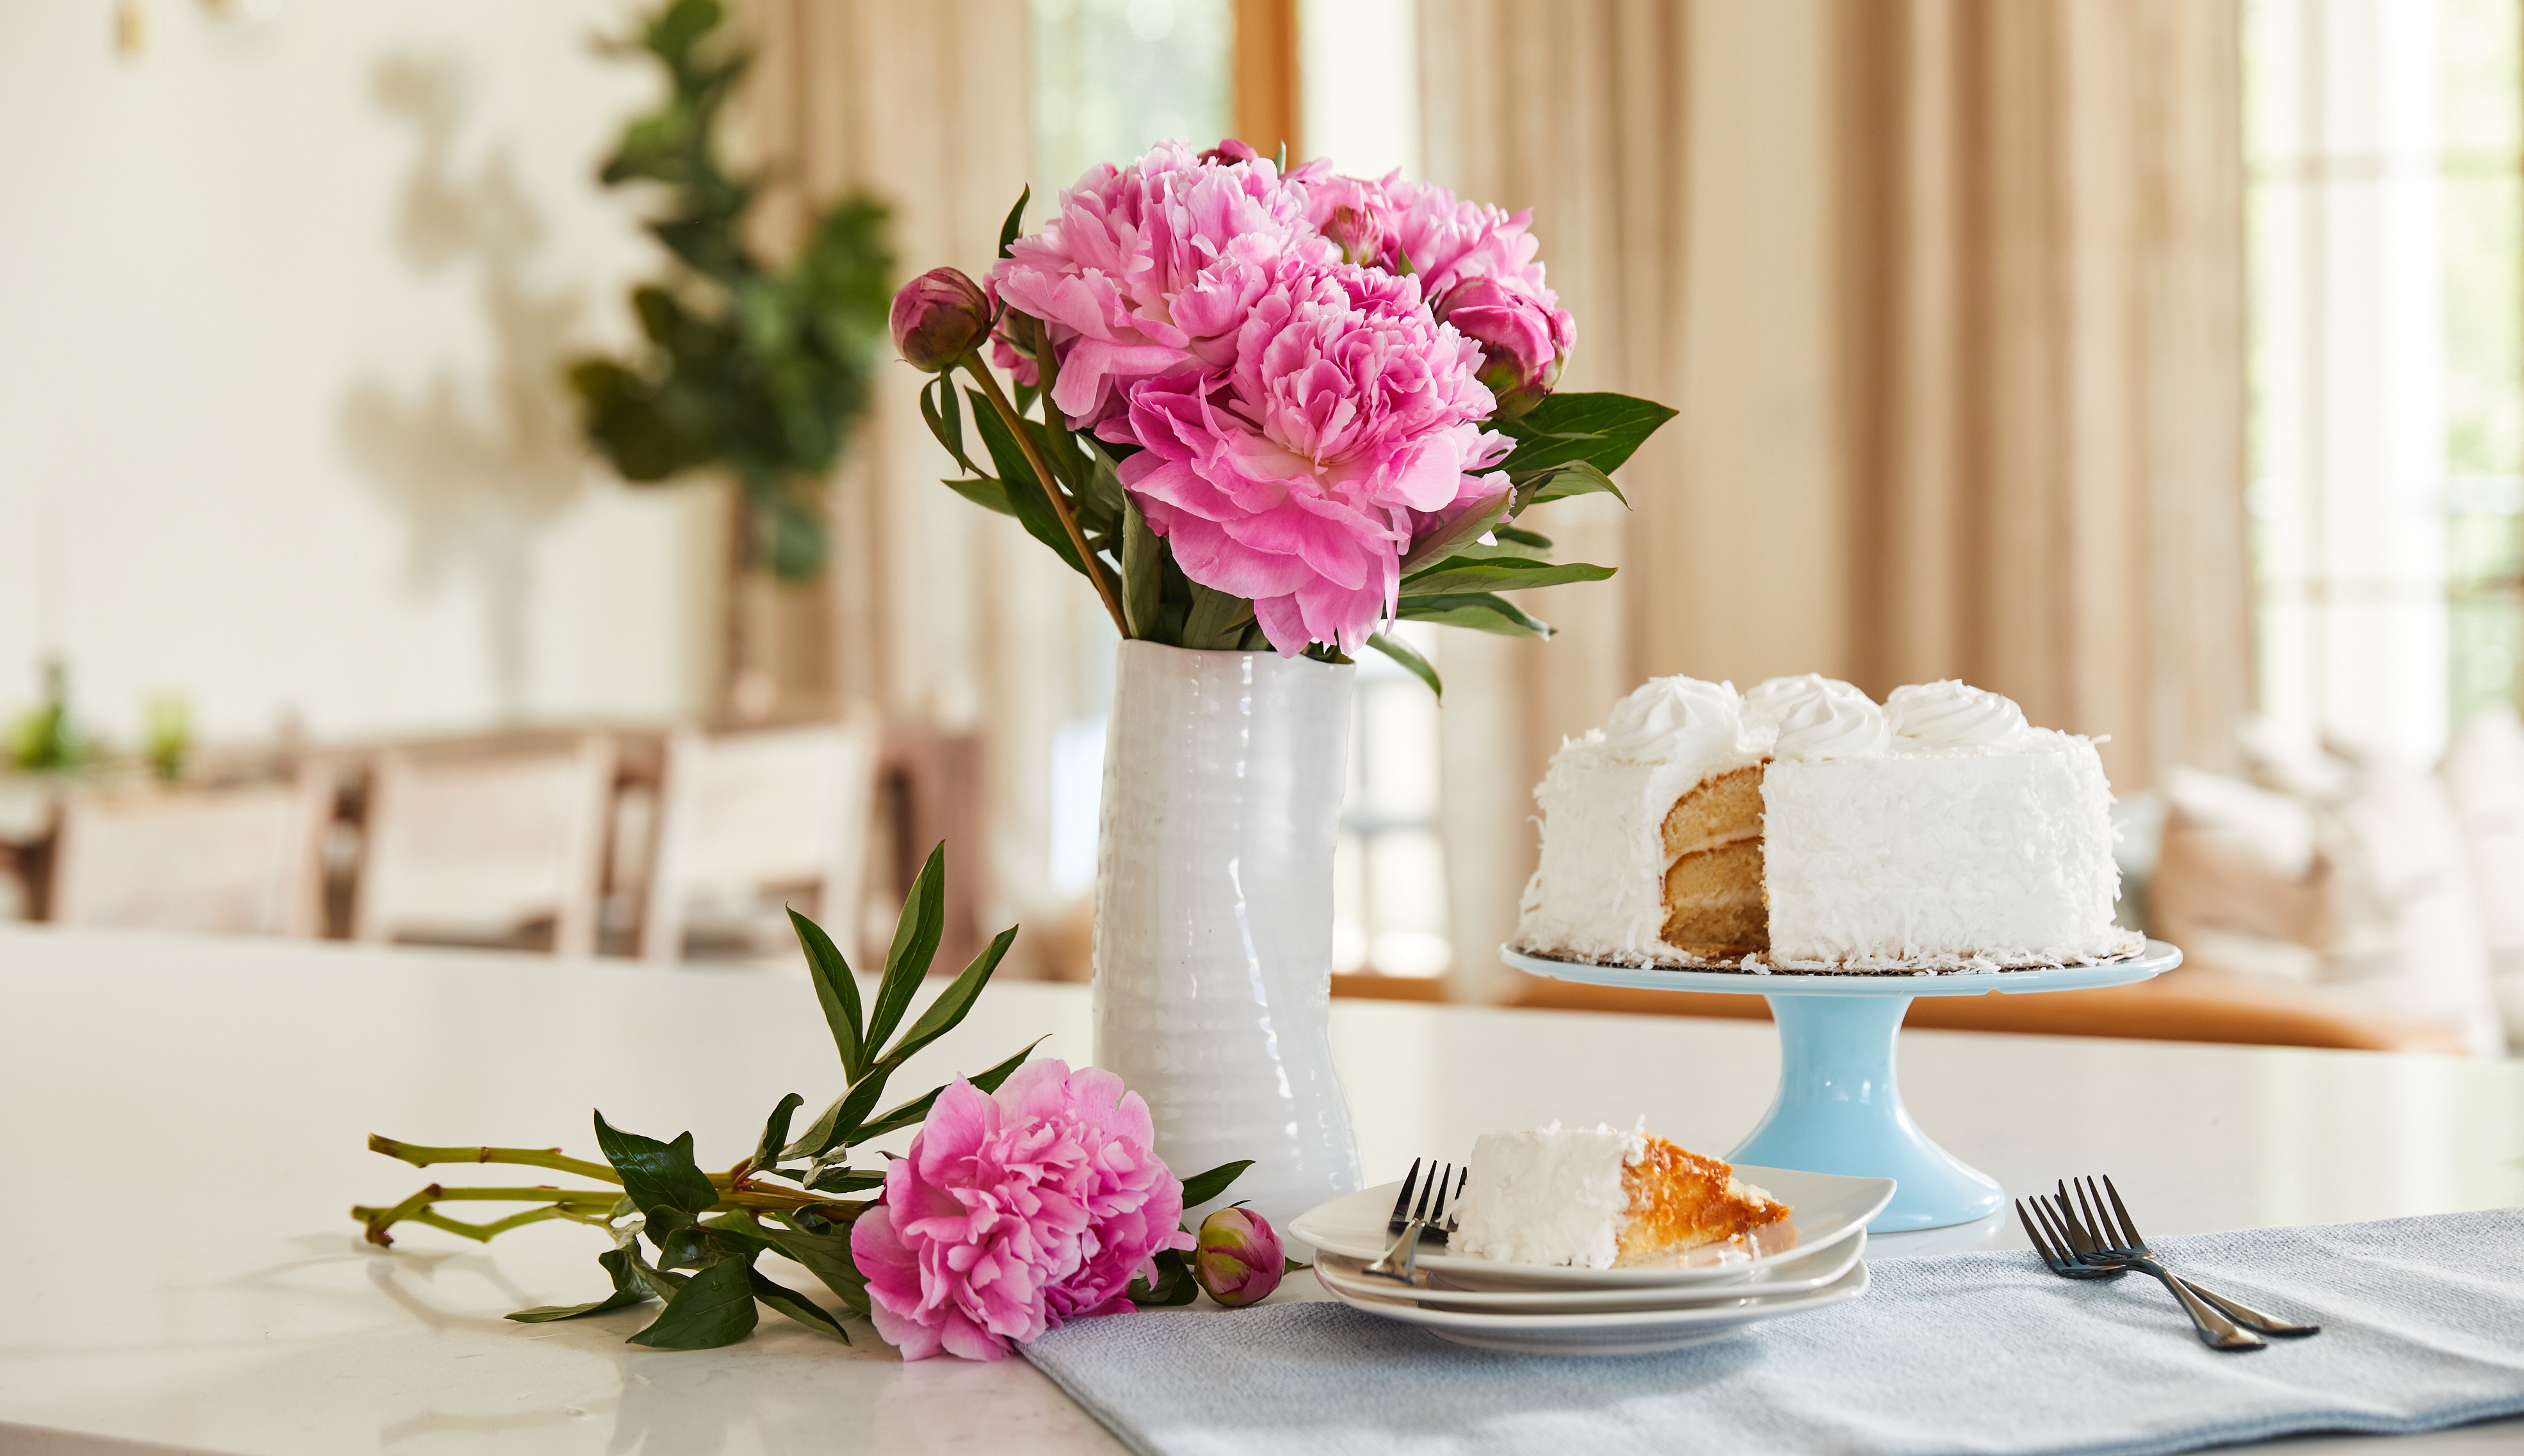 Bouquet of pink peony flowers and white cake on a countertop.